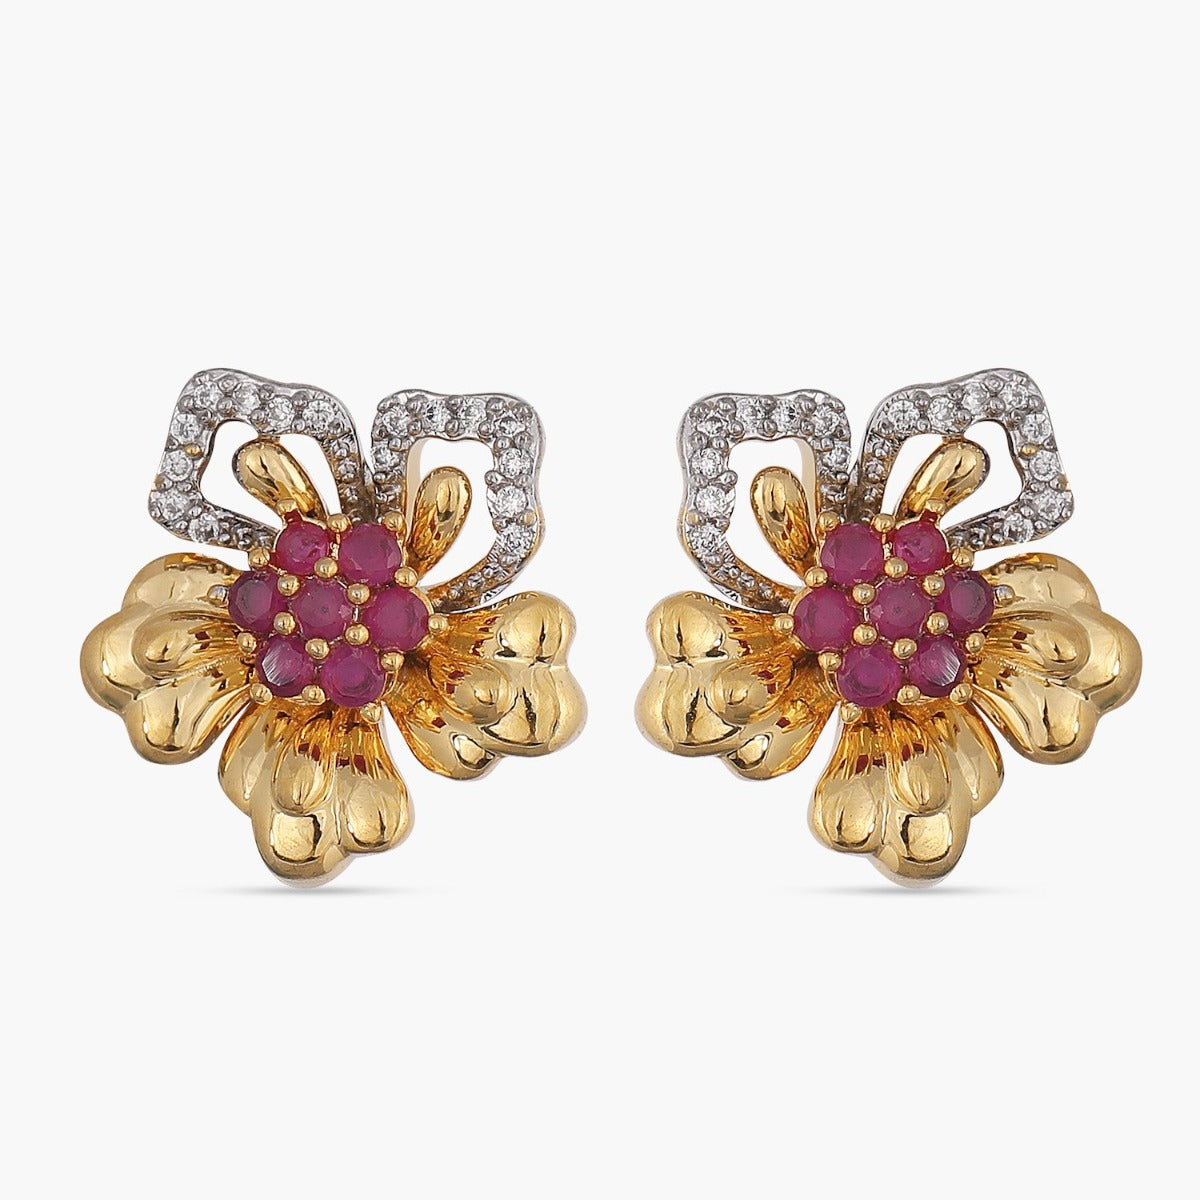 A pair of Indian style diamond, enamel and high karat gold earrings | Clars  Auction Gallery